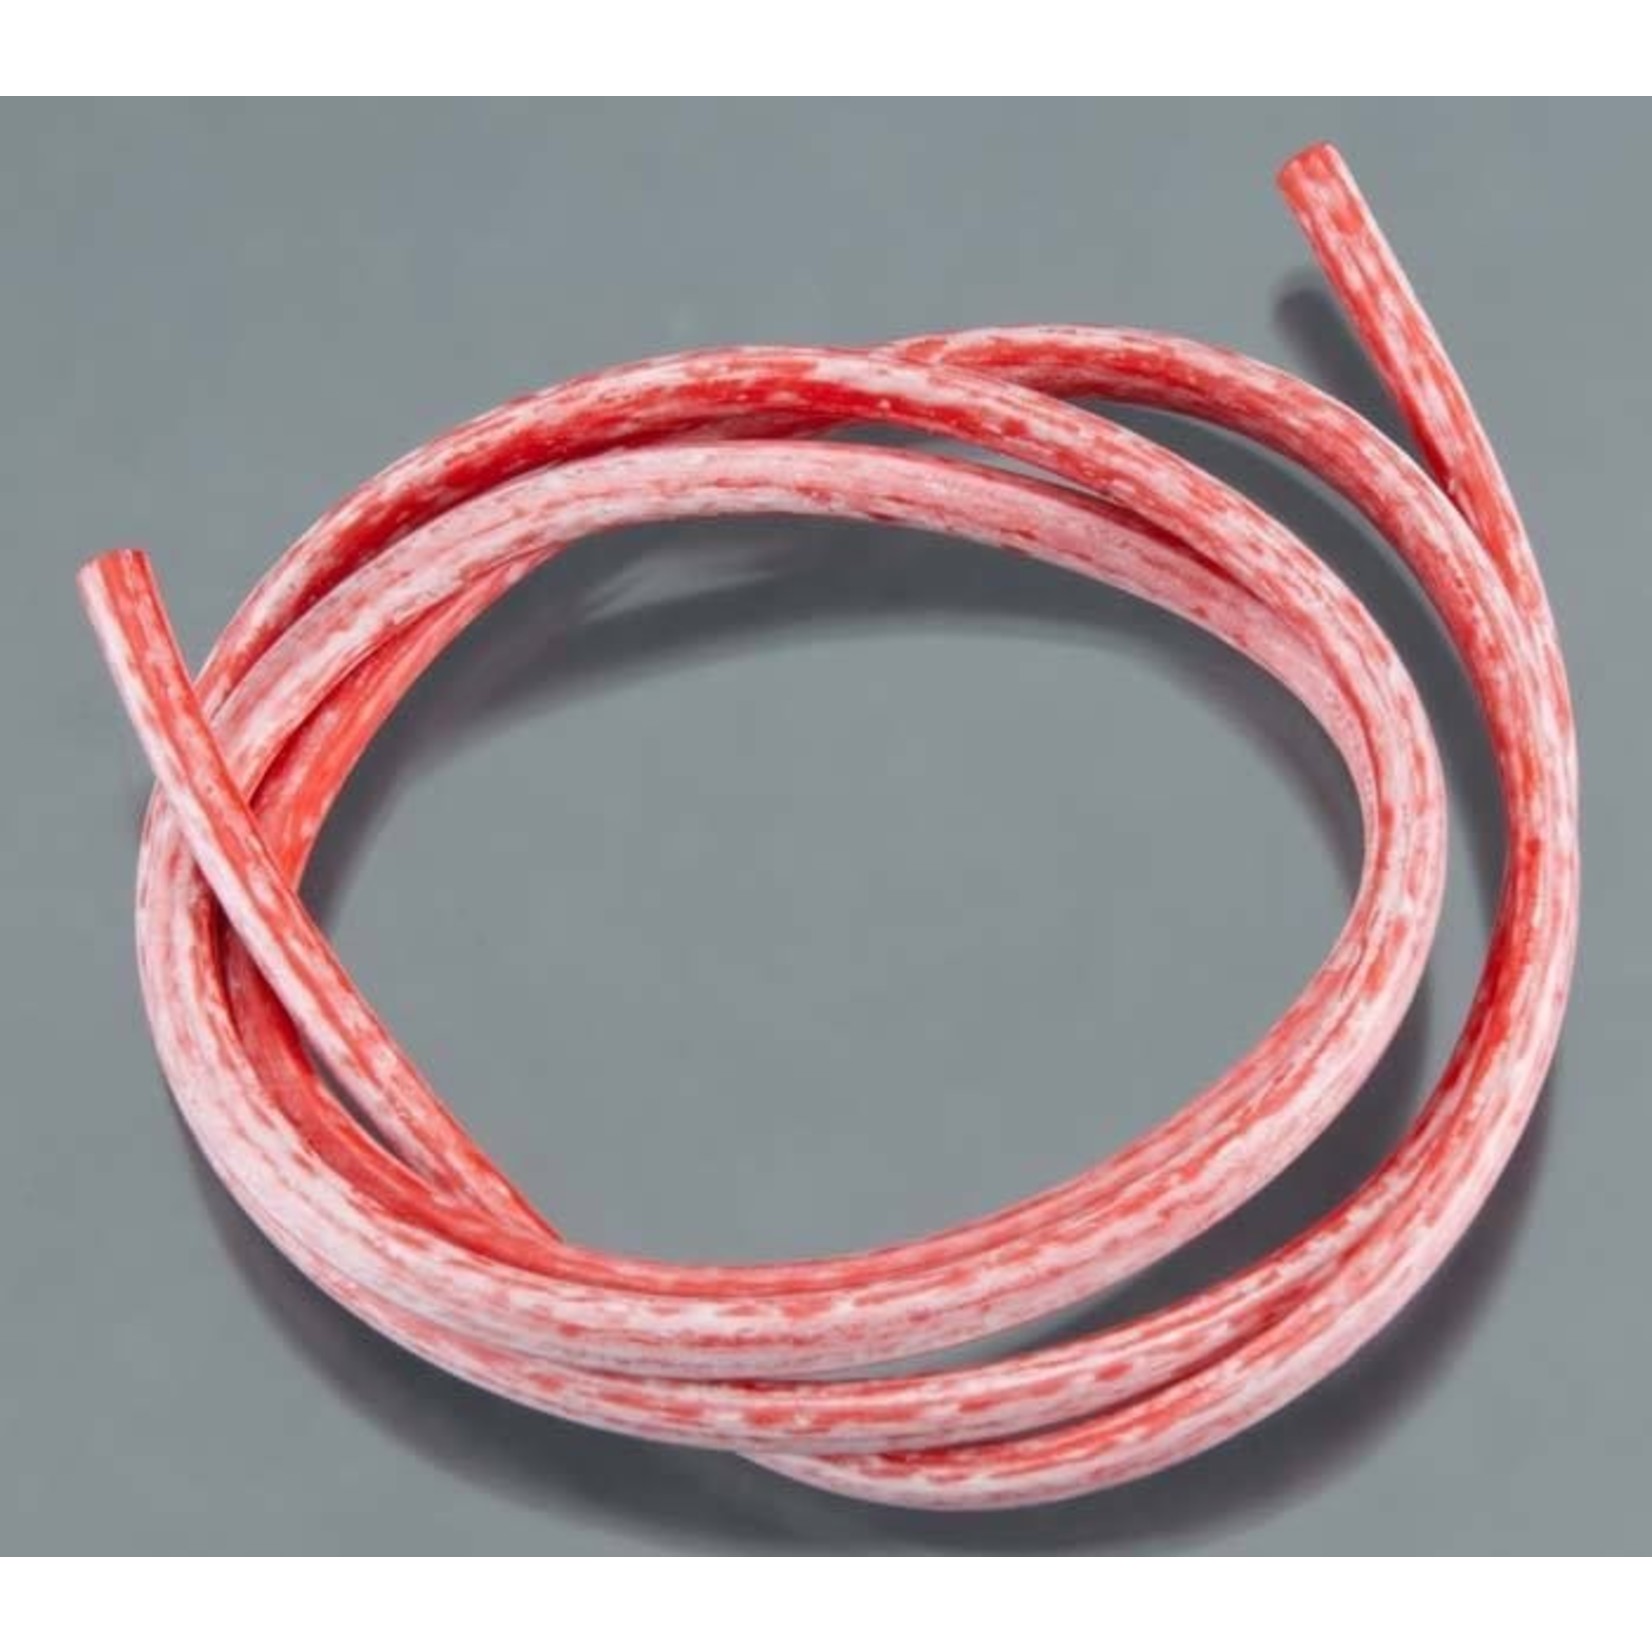 Castle Creations Wire, 36", 10AWG, Red